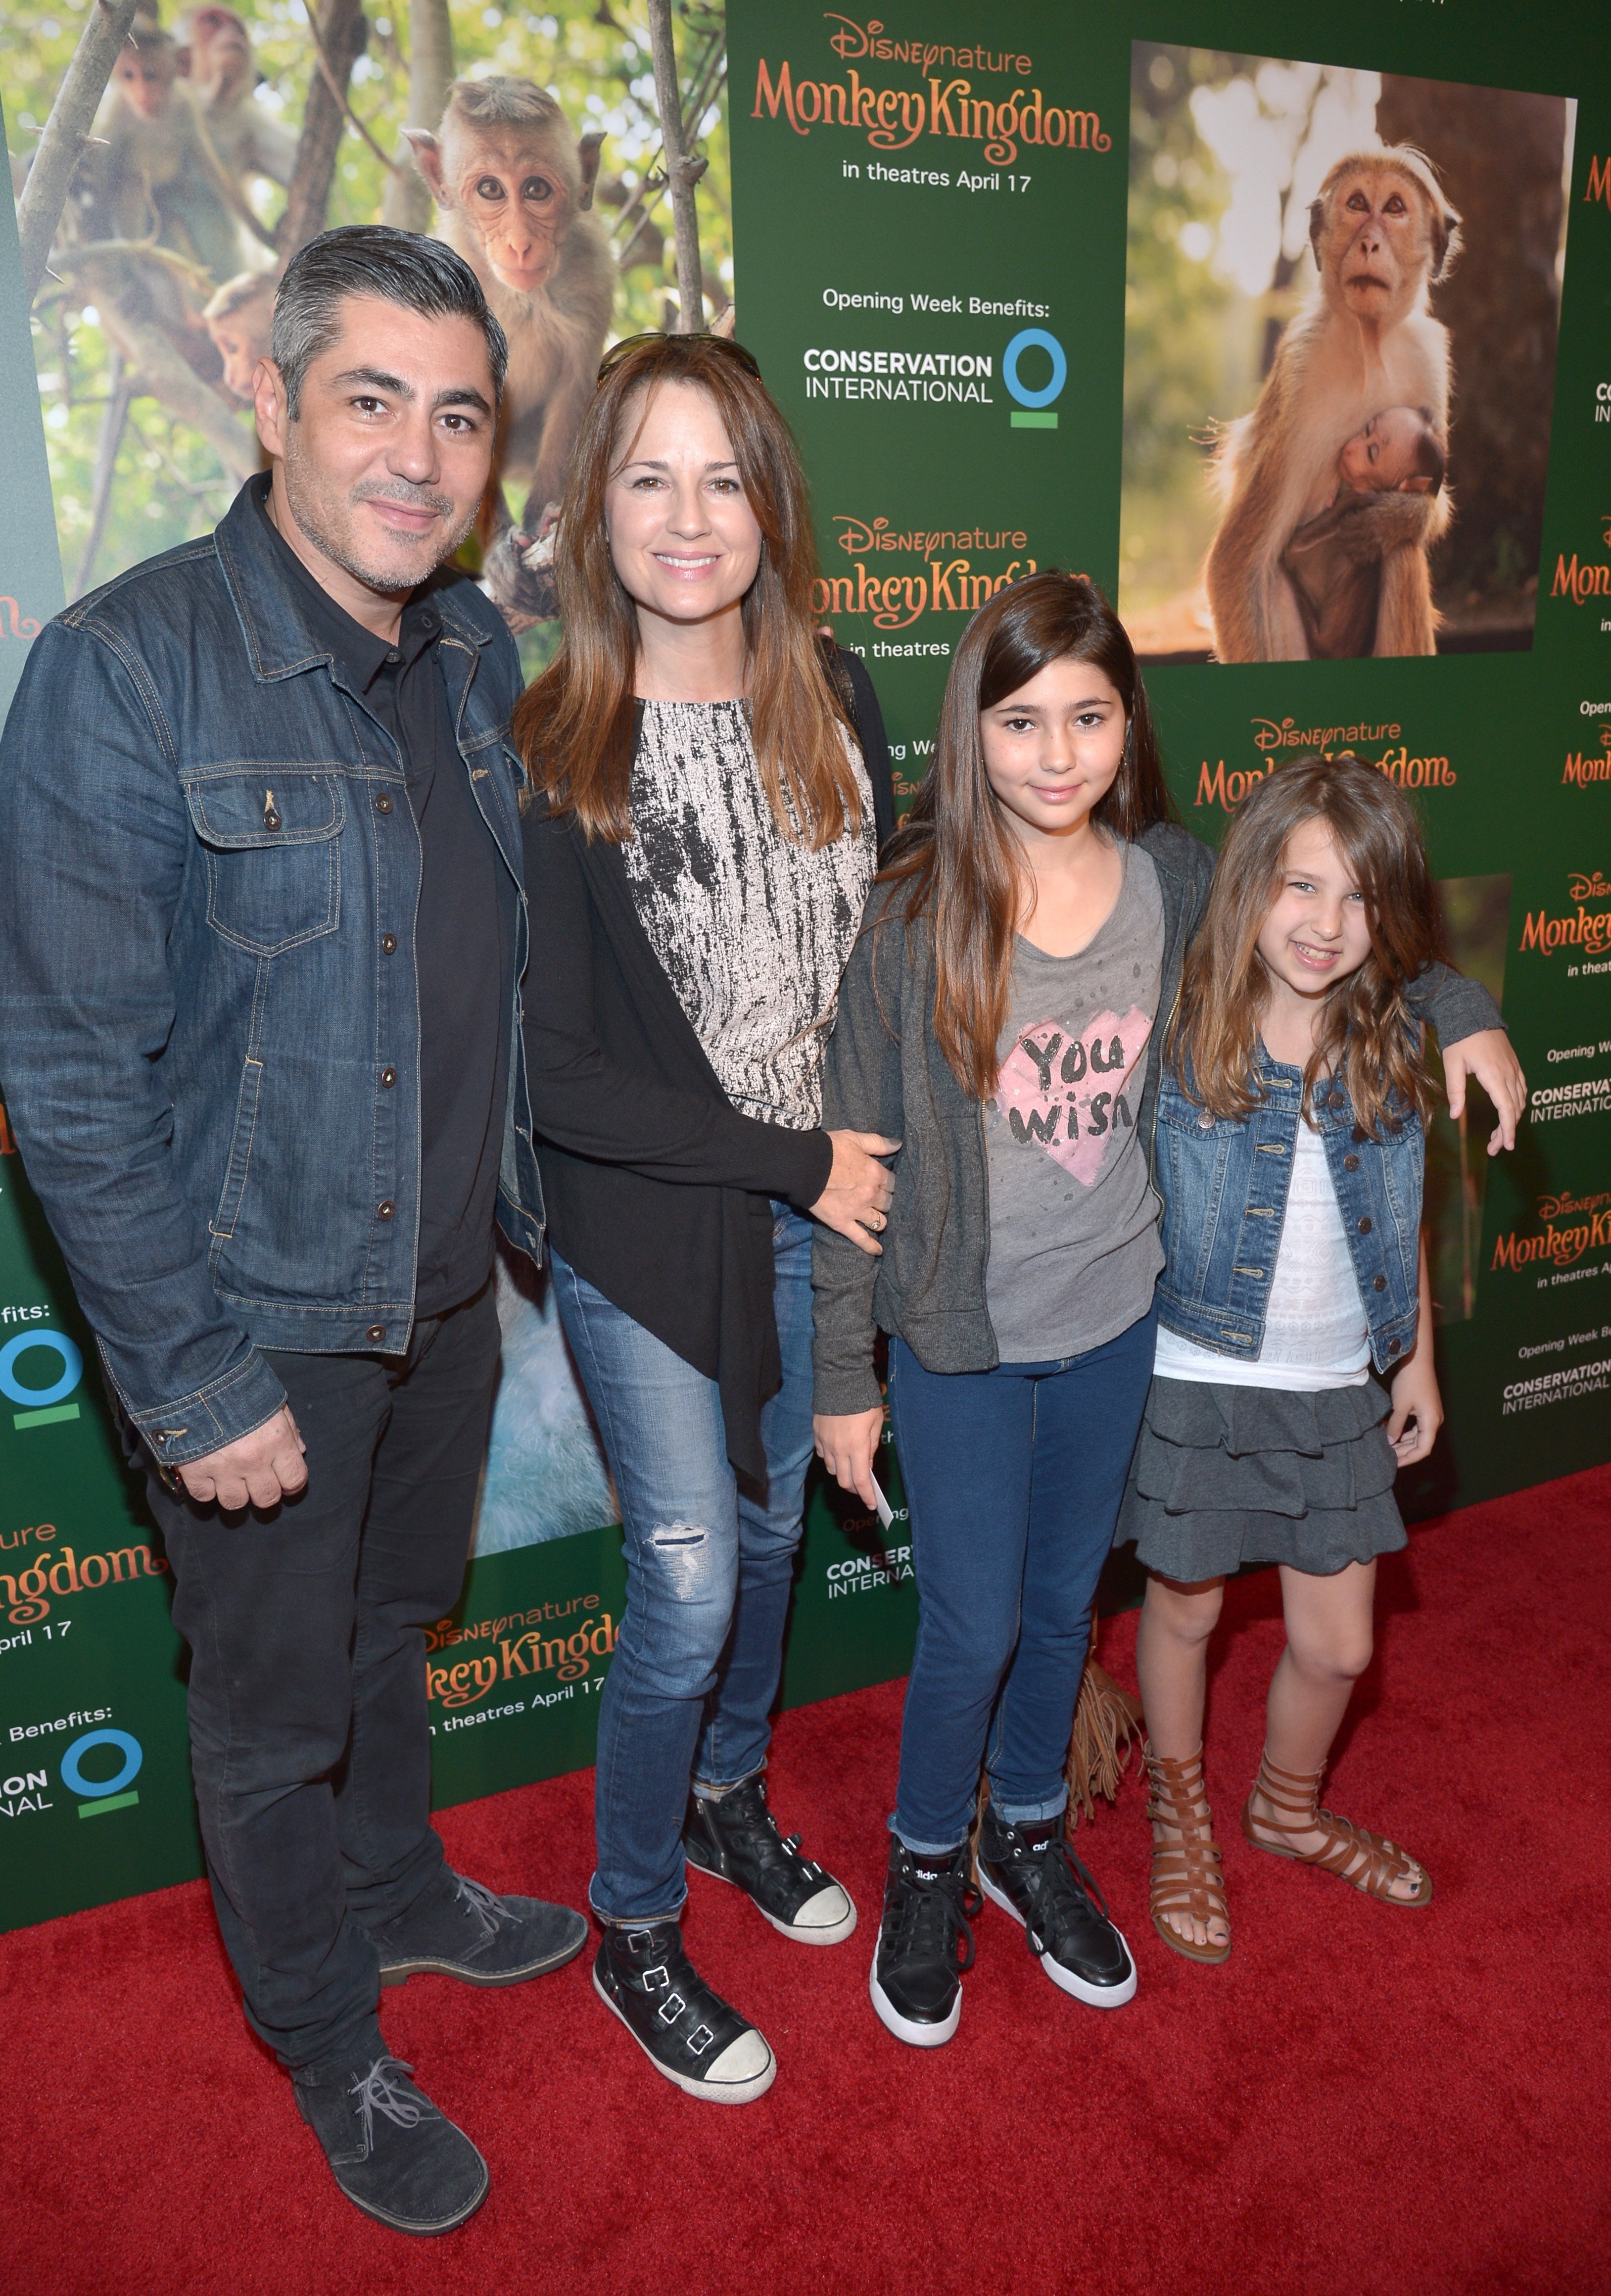 Danny Nucci, Paula Marshall, and daughters Maya Nucci and Savannah Nucci attend the world premiere Of Disney's "Monkey Kingdom" at Pacific Theatres at The Grove on April 12, 2015, in Los Angeles, California. | Source: Getty Images.